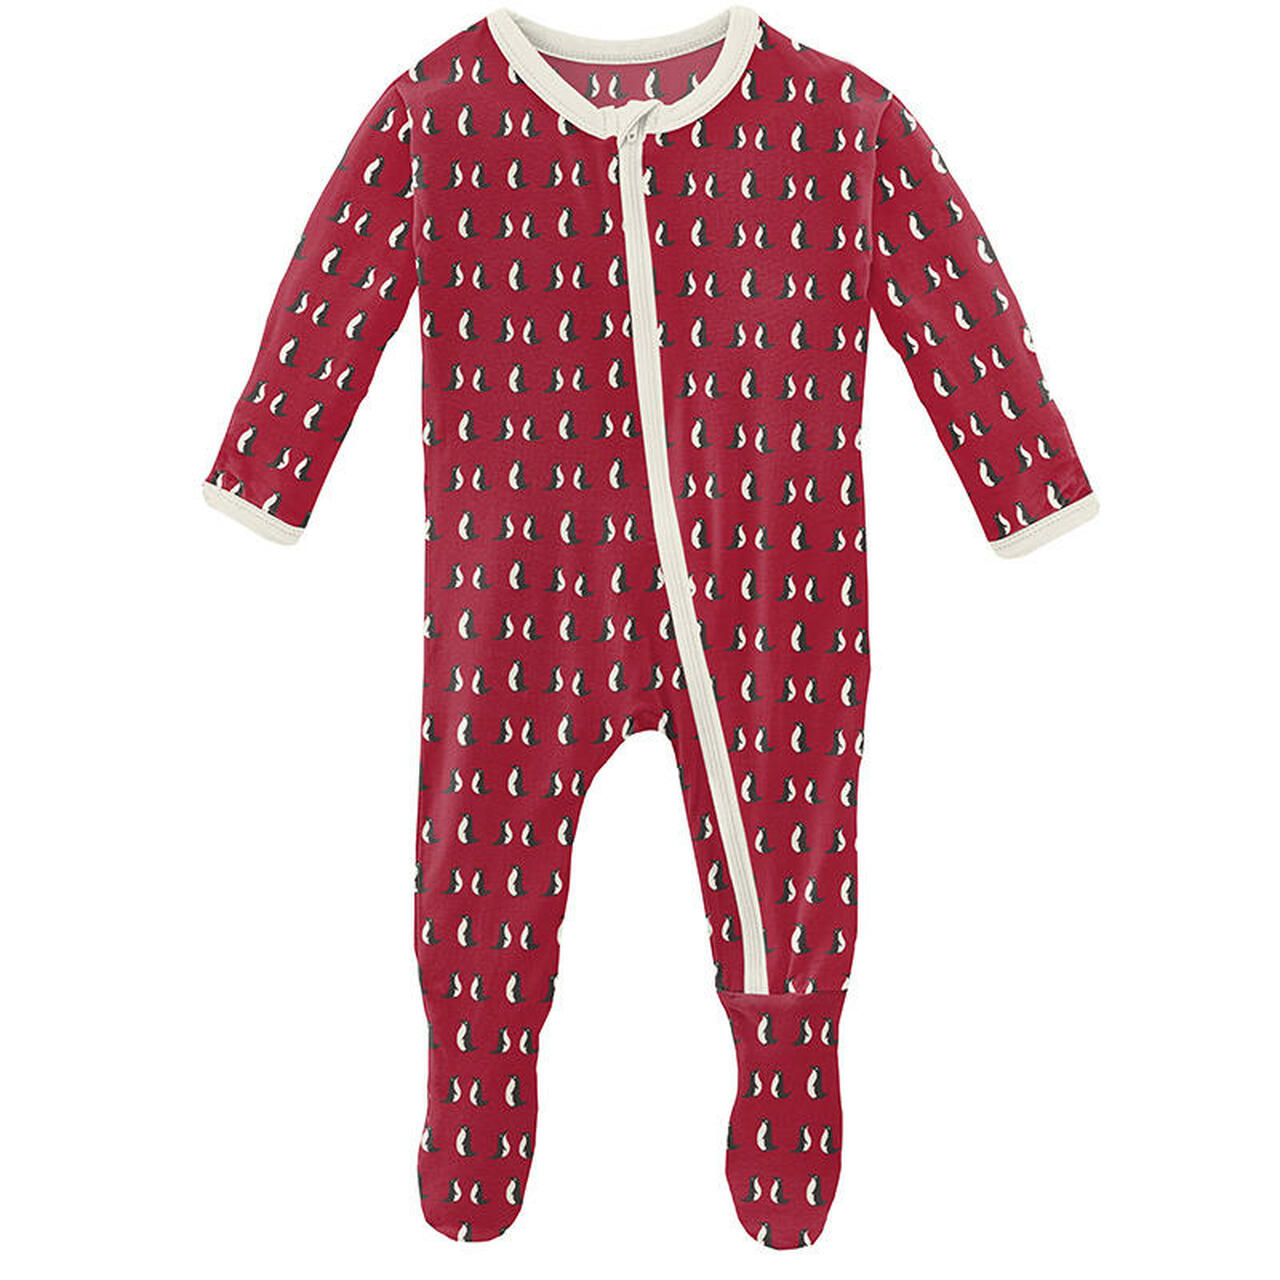 Boy's Print Footie with Zipper - Crimson Penguins - KicKee Pants-I Footie-Graceful & Chic Boutique, Family Clothing Store in Waxahachie, Texas